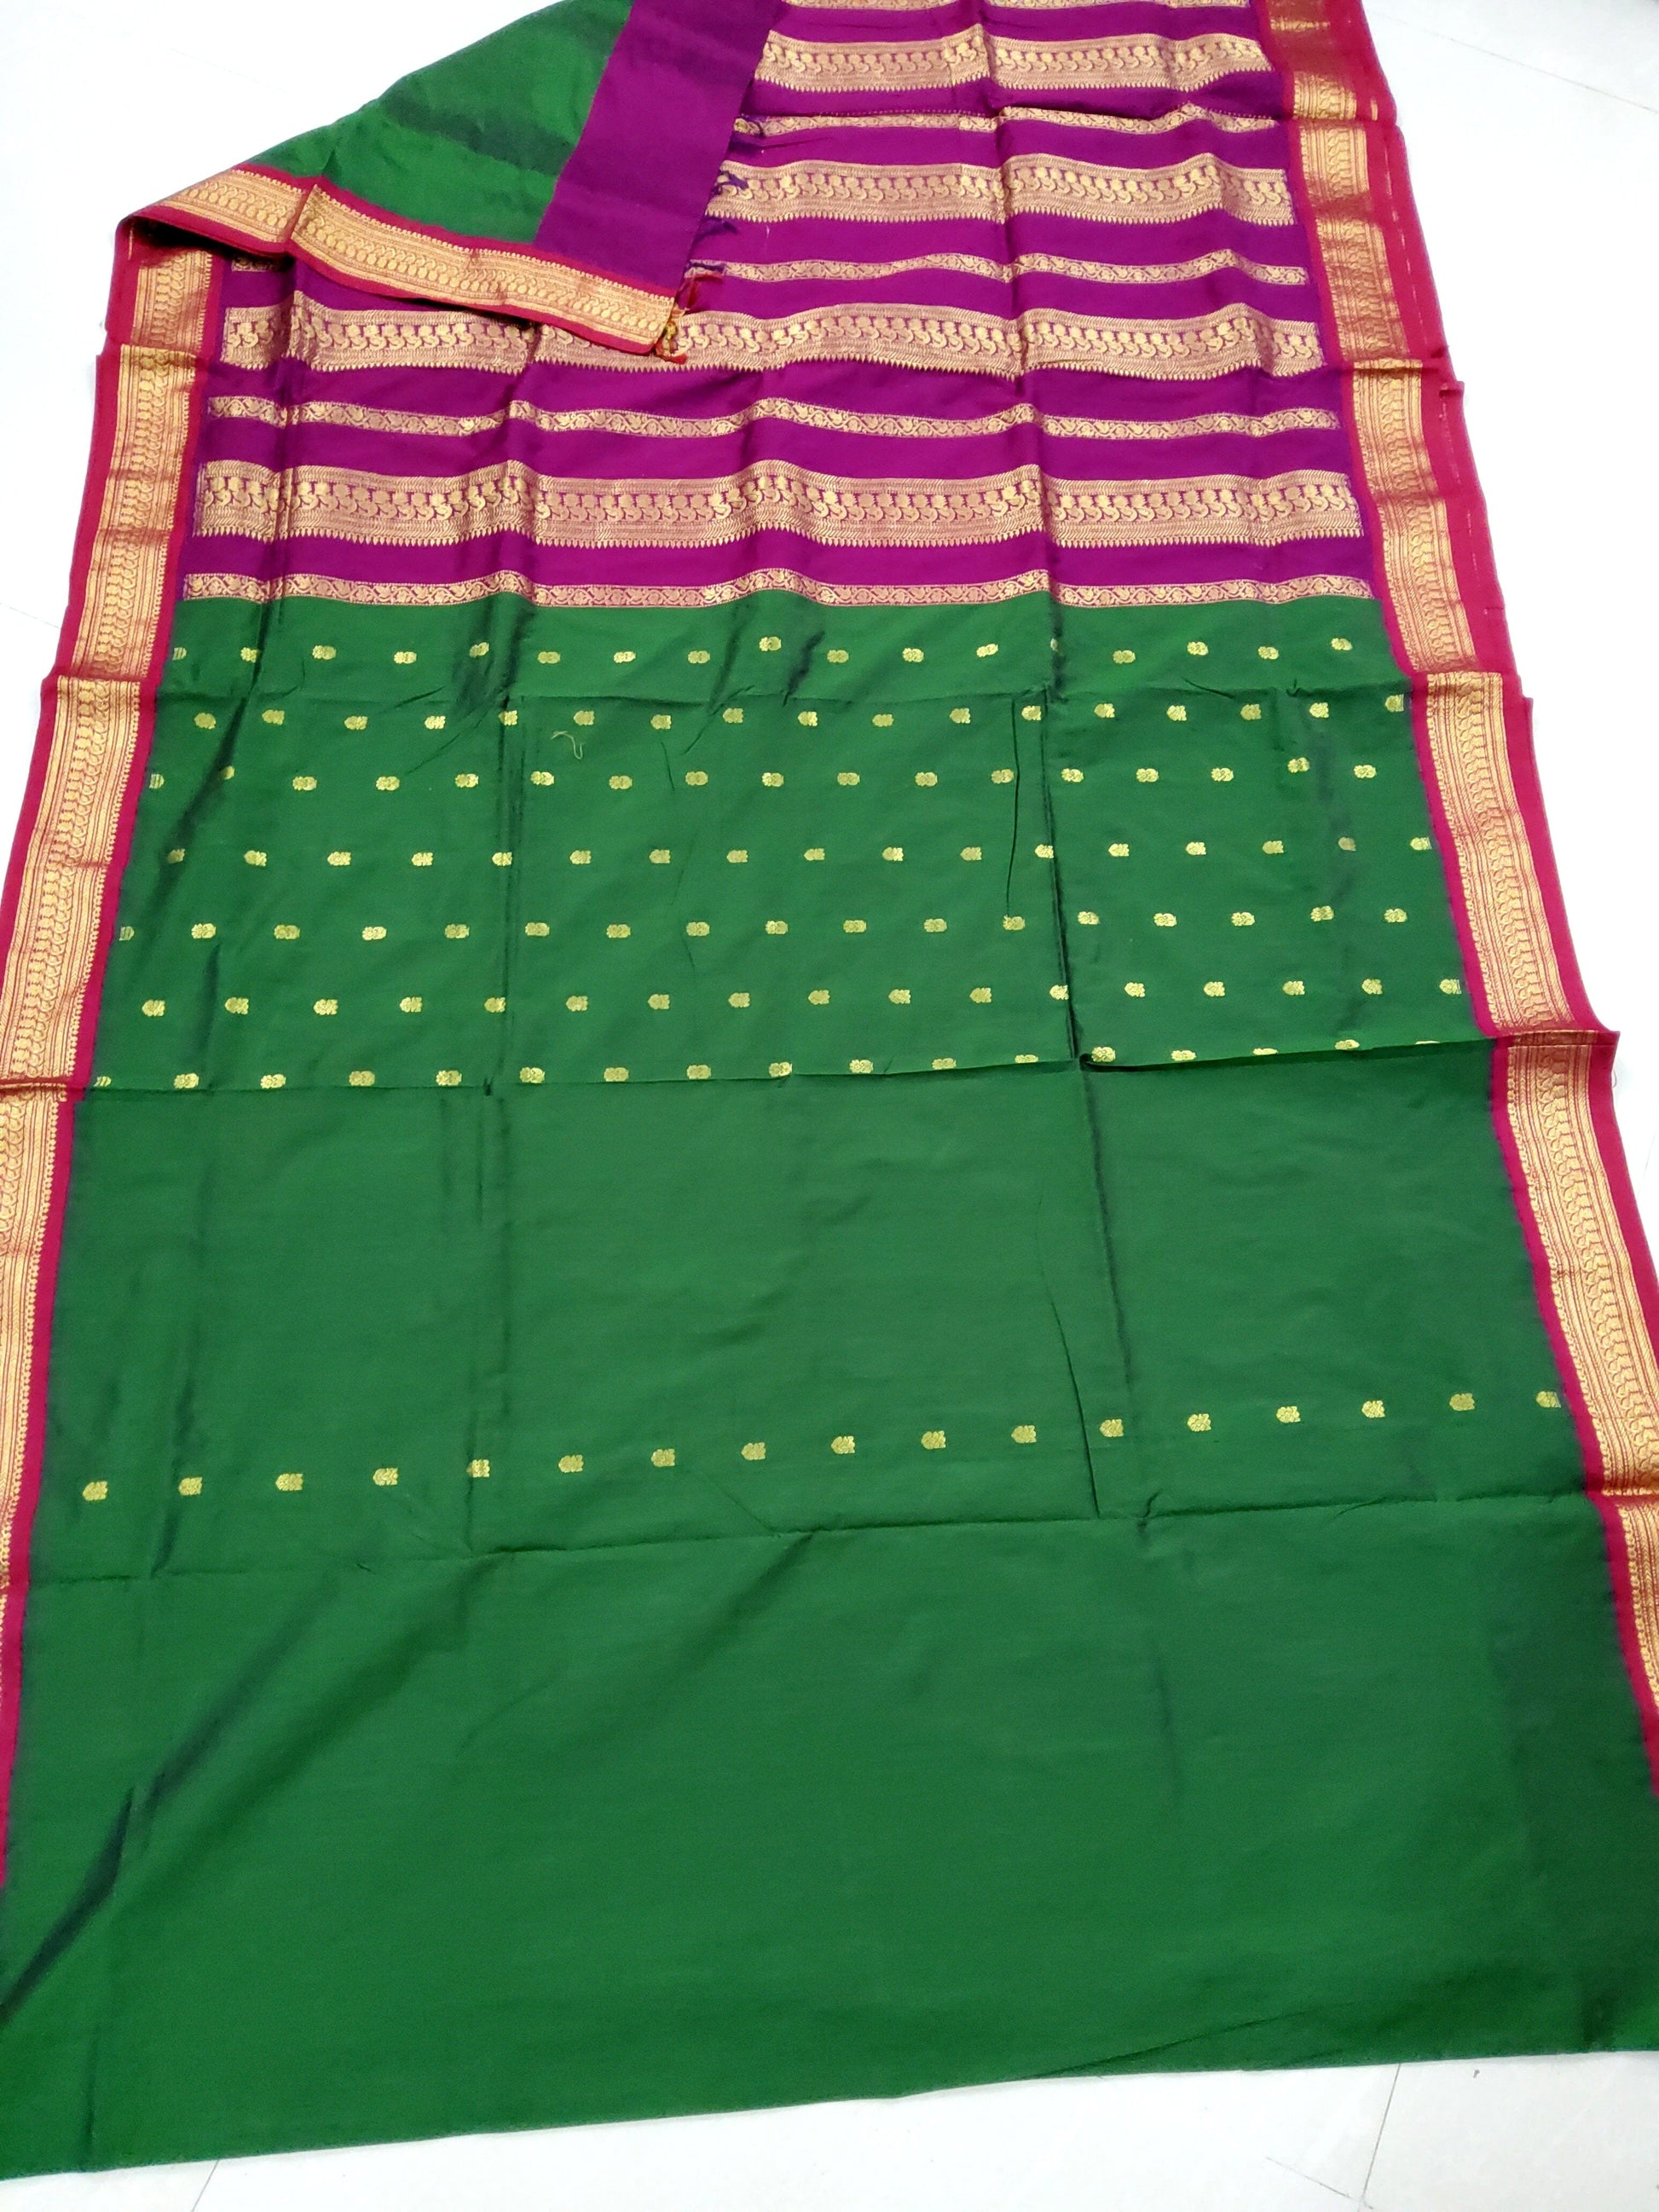 Gadhwal Cotton Saree with Contrast blouseGadhwal Cotton Saree with Contrast blouse